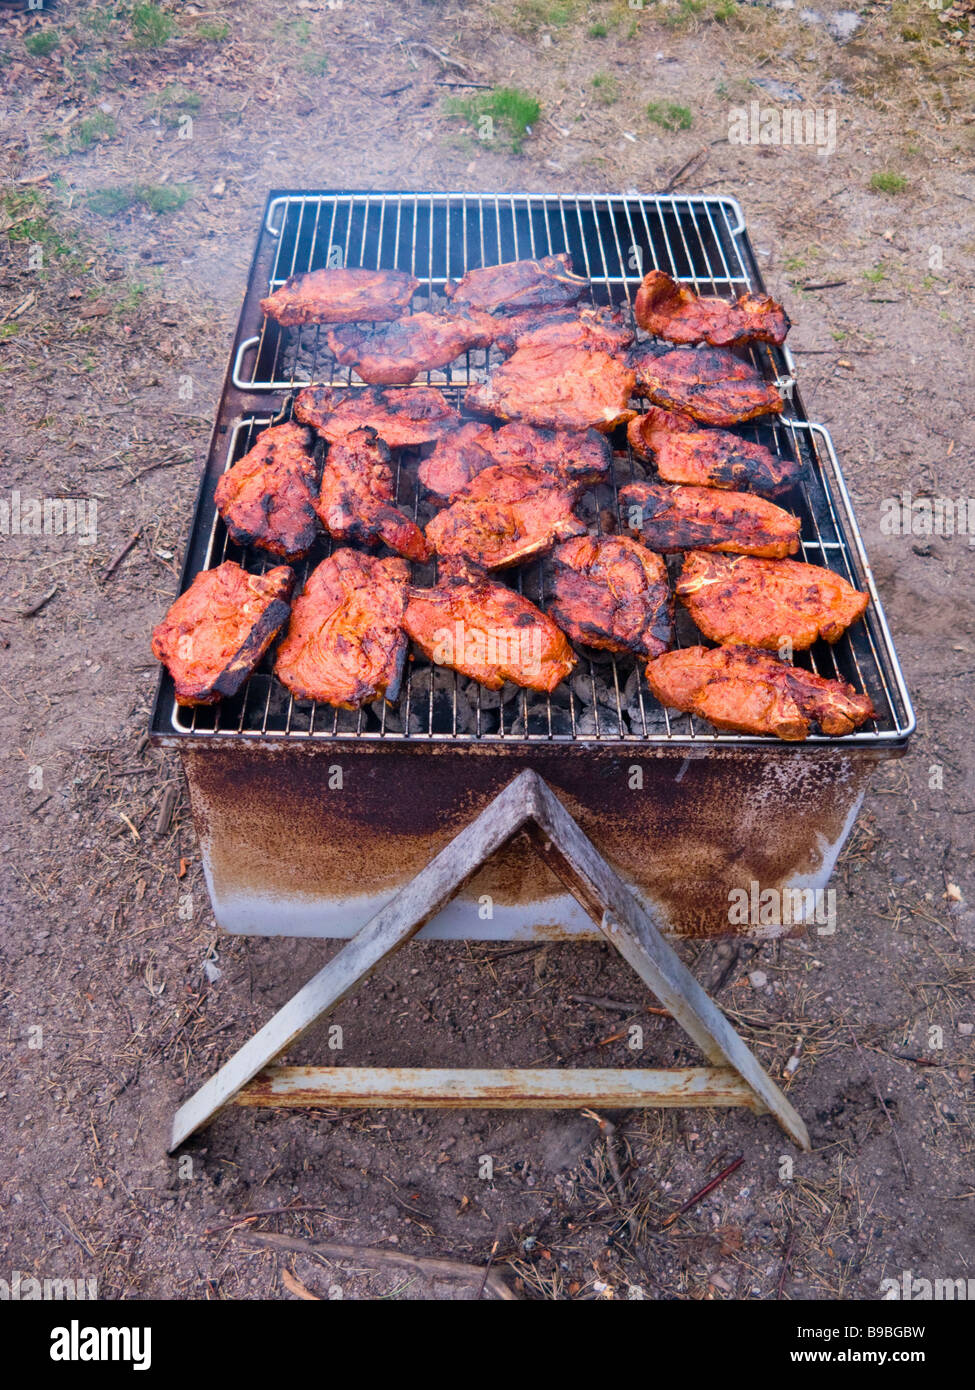 Grilled meat on the grill Stock Photo